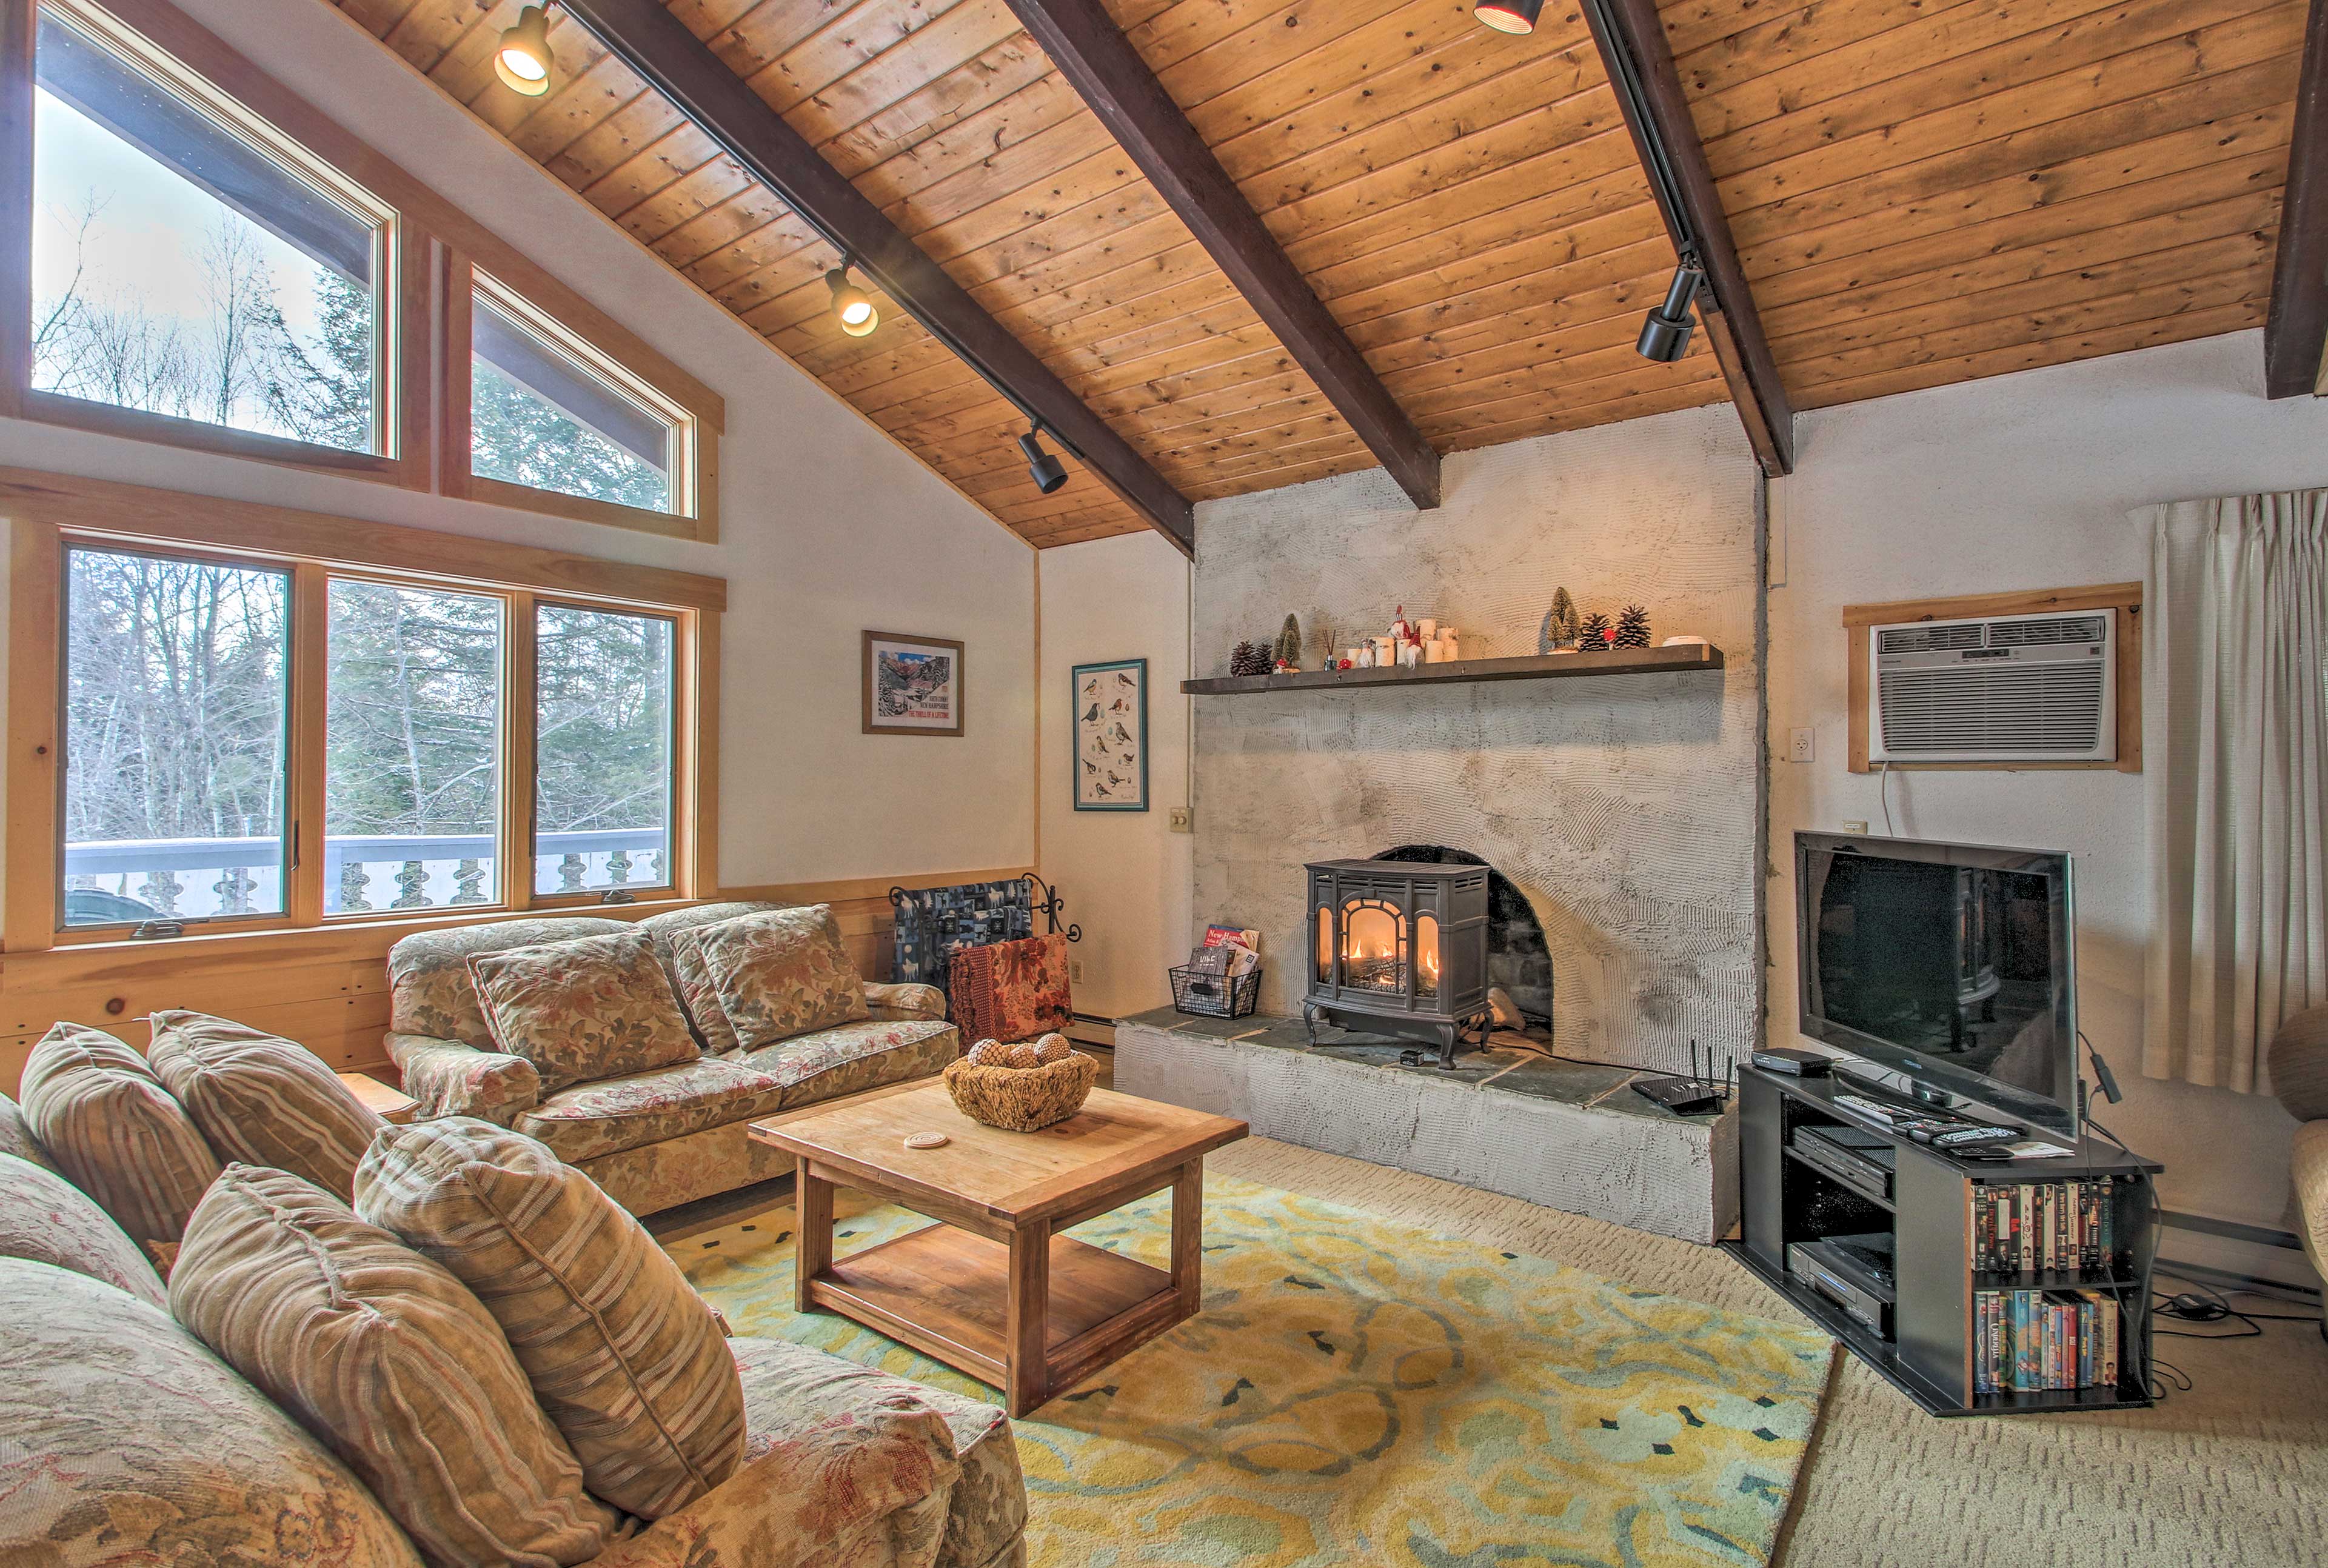 This chalet is the perfect home base for all of your White Mountain adventures!